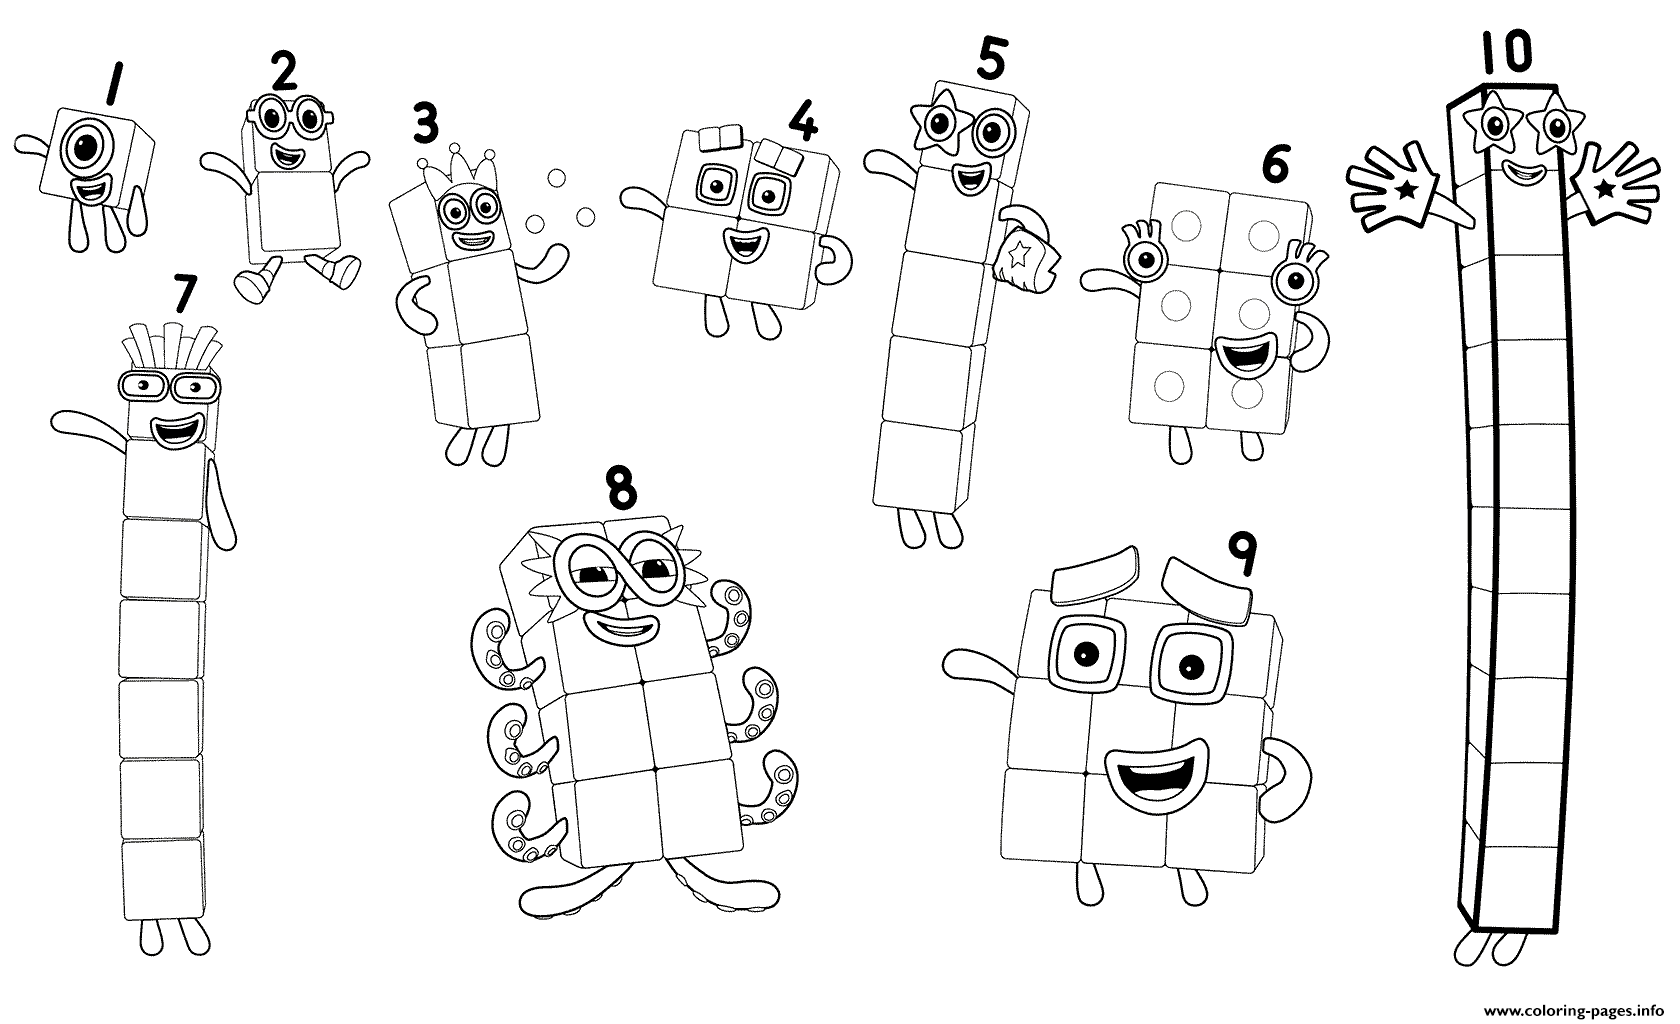 Number Blocks Numbers 1 To 10 Coloring Pages Printable